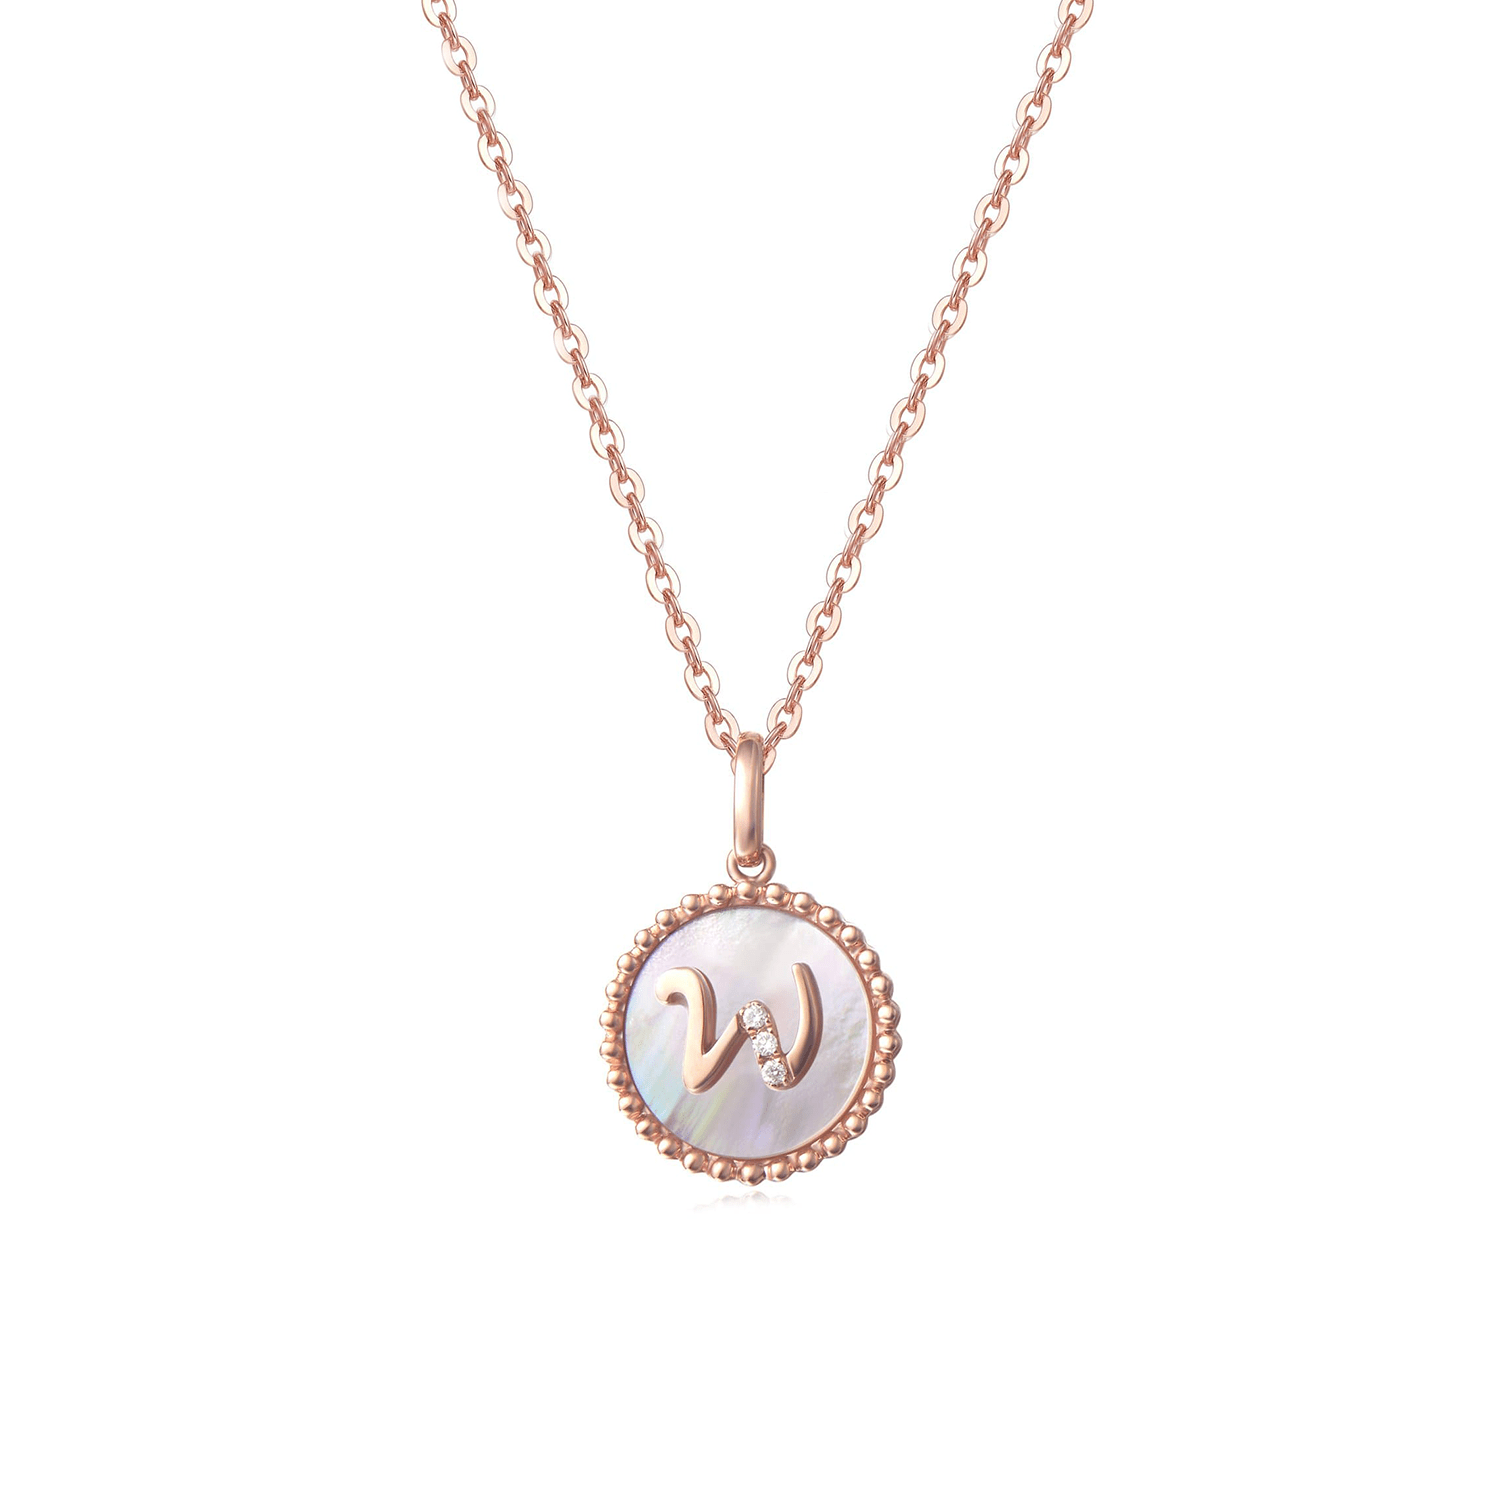 FANCIME Letter Initial Dainty 14K Rose Gold Necklace W Main